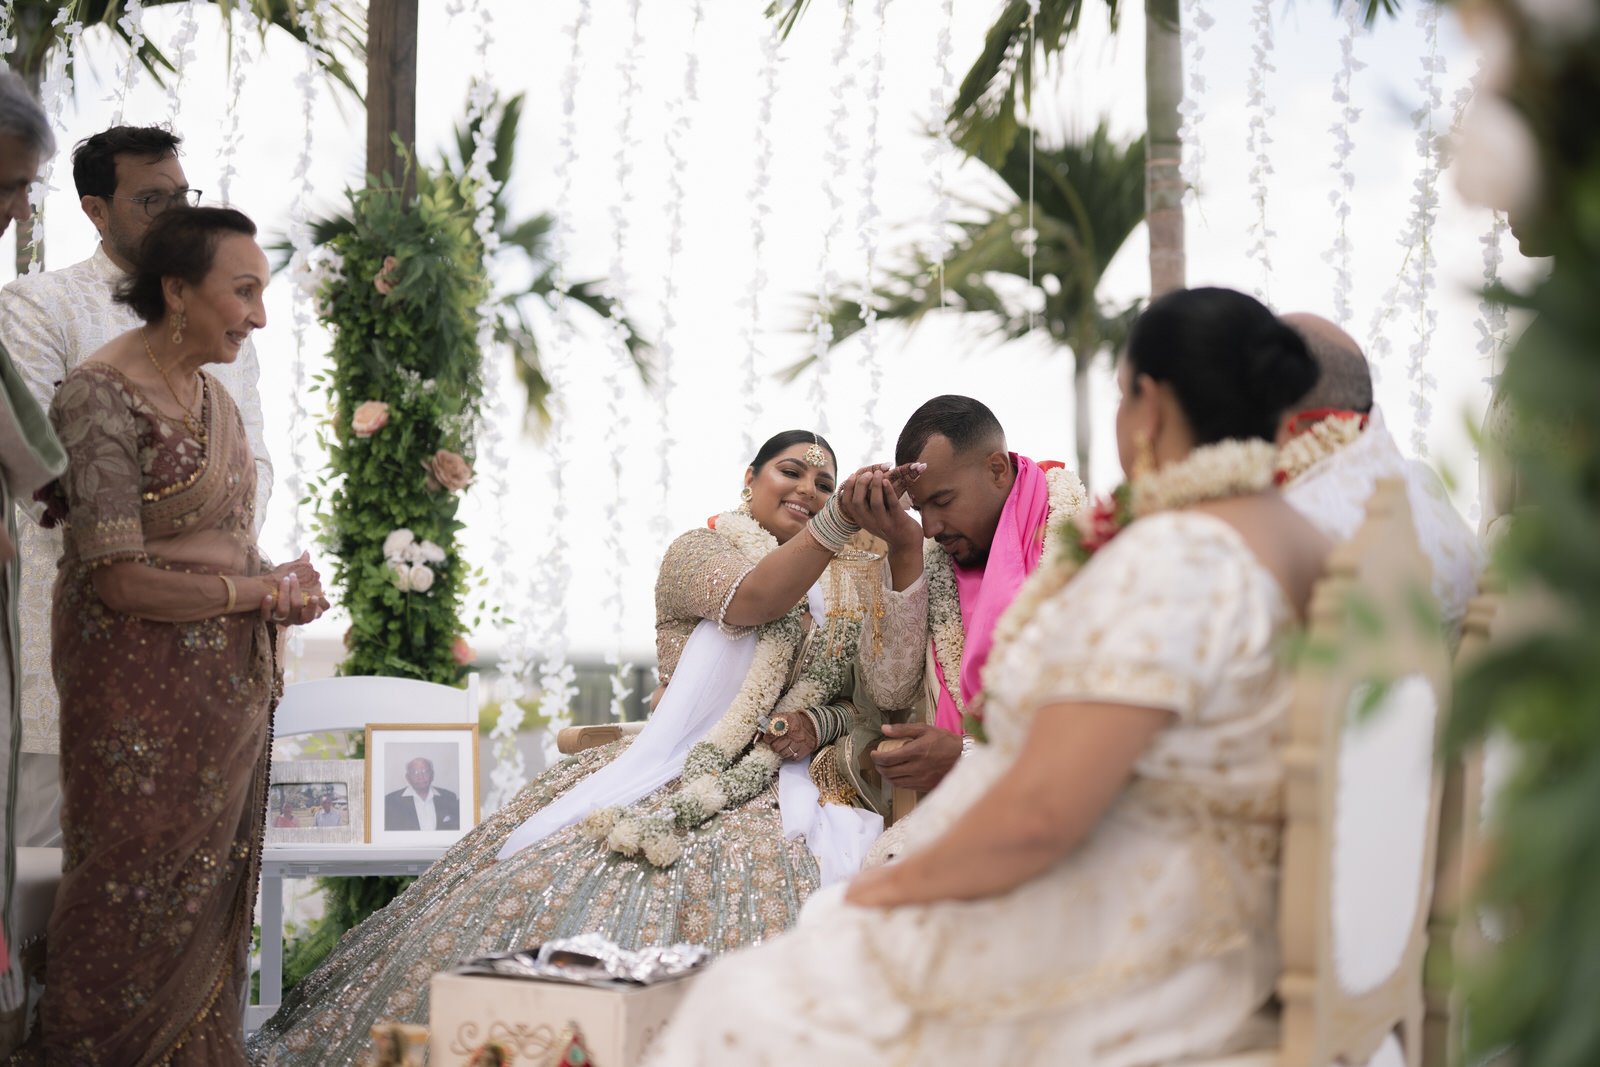 Luxury Indian Wedding in Miami Florida - Indian wedding photographer miami florida - michelle gonzalez photography - loews hotel in coral gables wedding-71.jpg